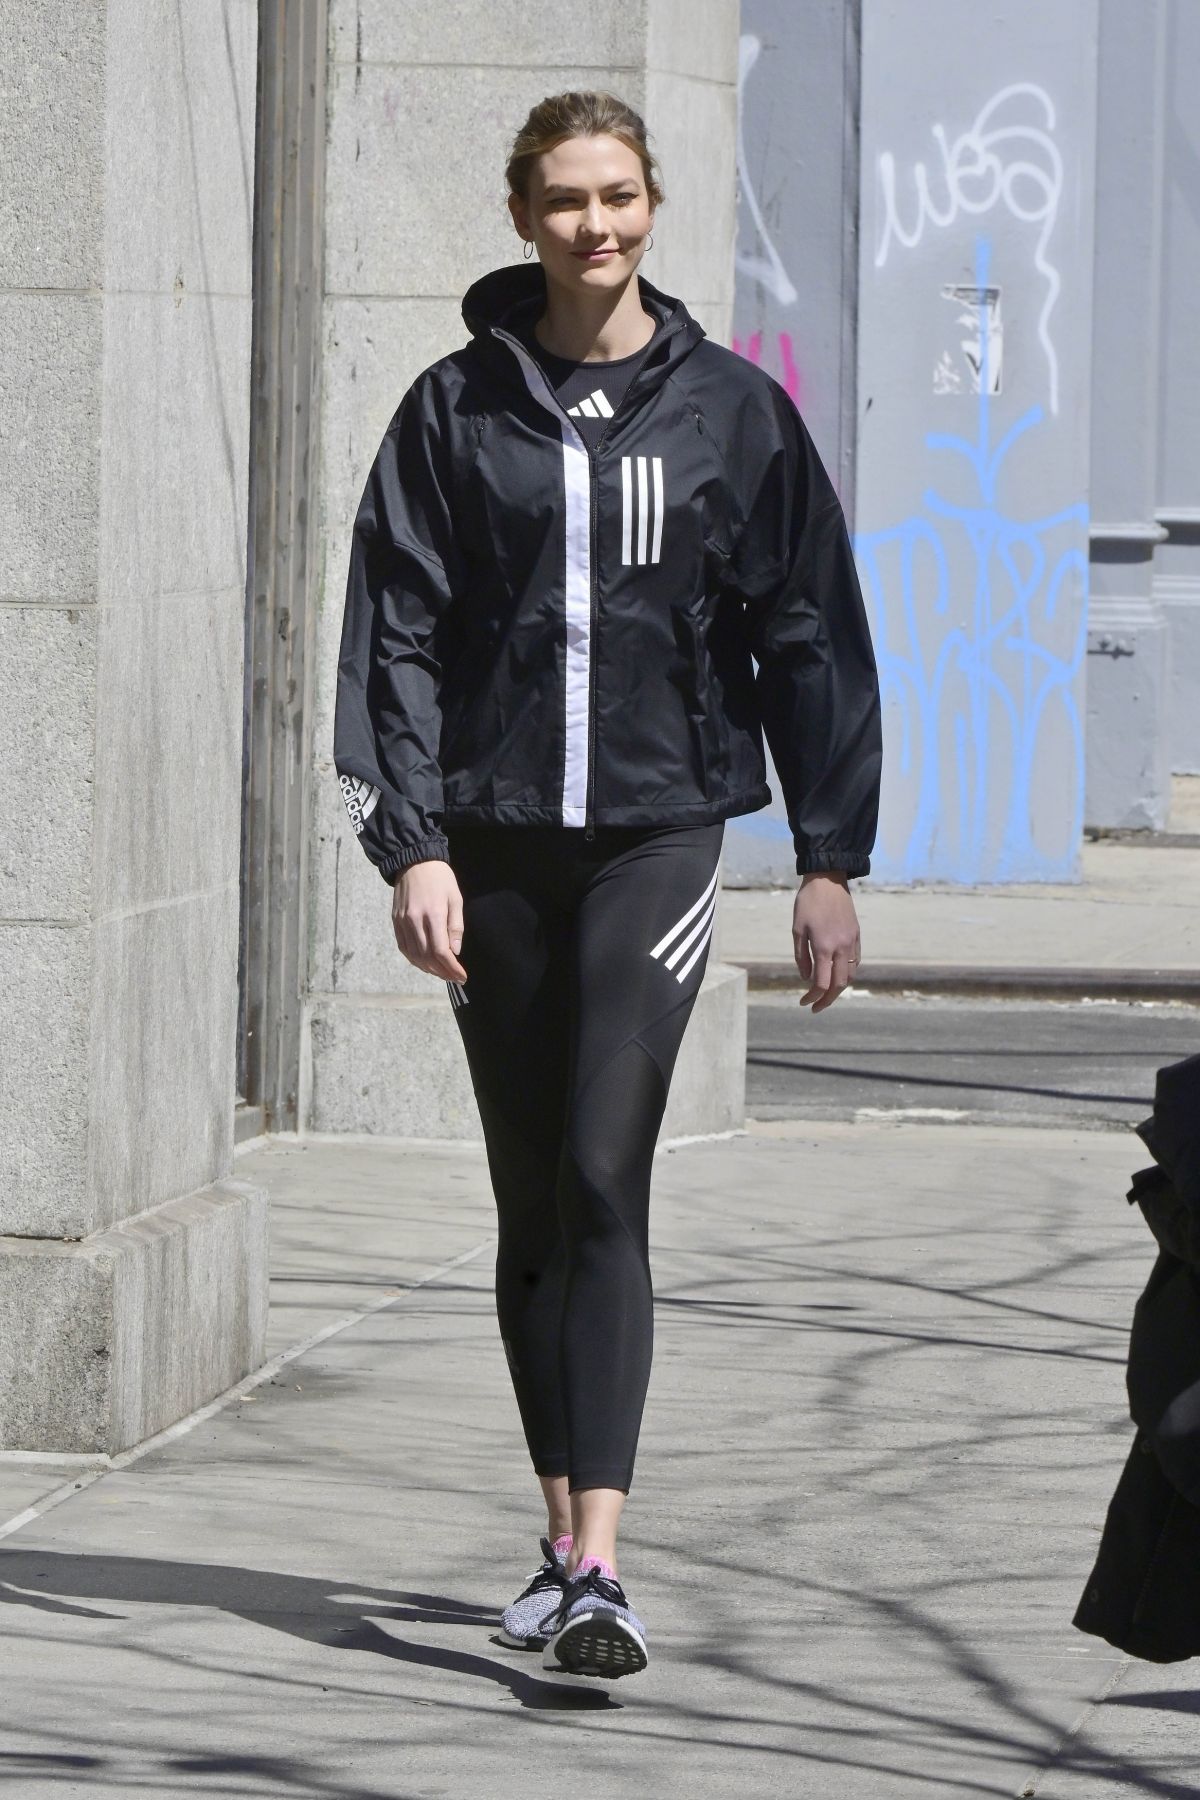 karlie-kloss-on-the-set-of-a-adidas-photoshoot-in-new-york-04-03-2019-1.jpg